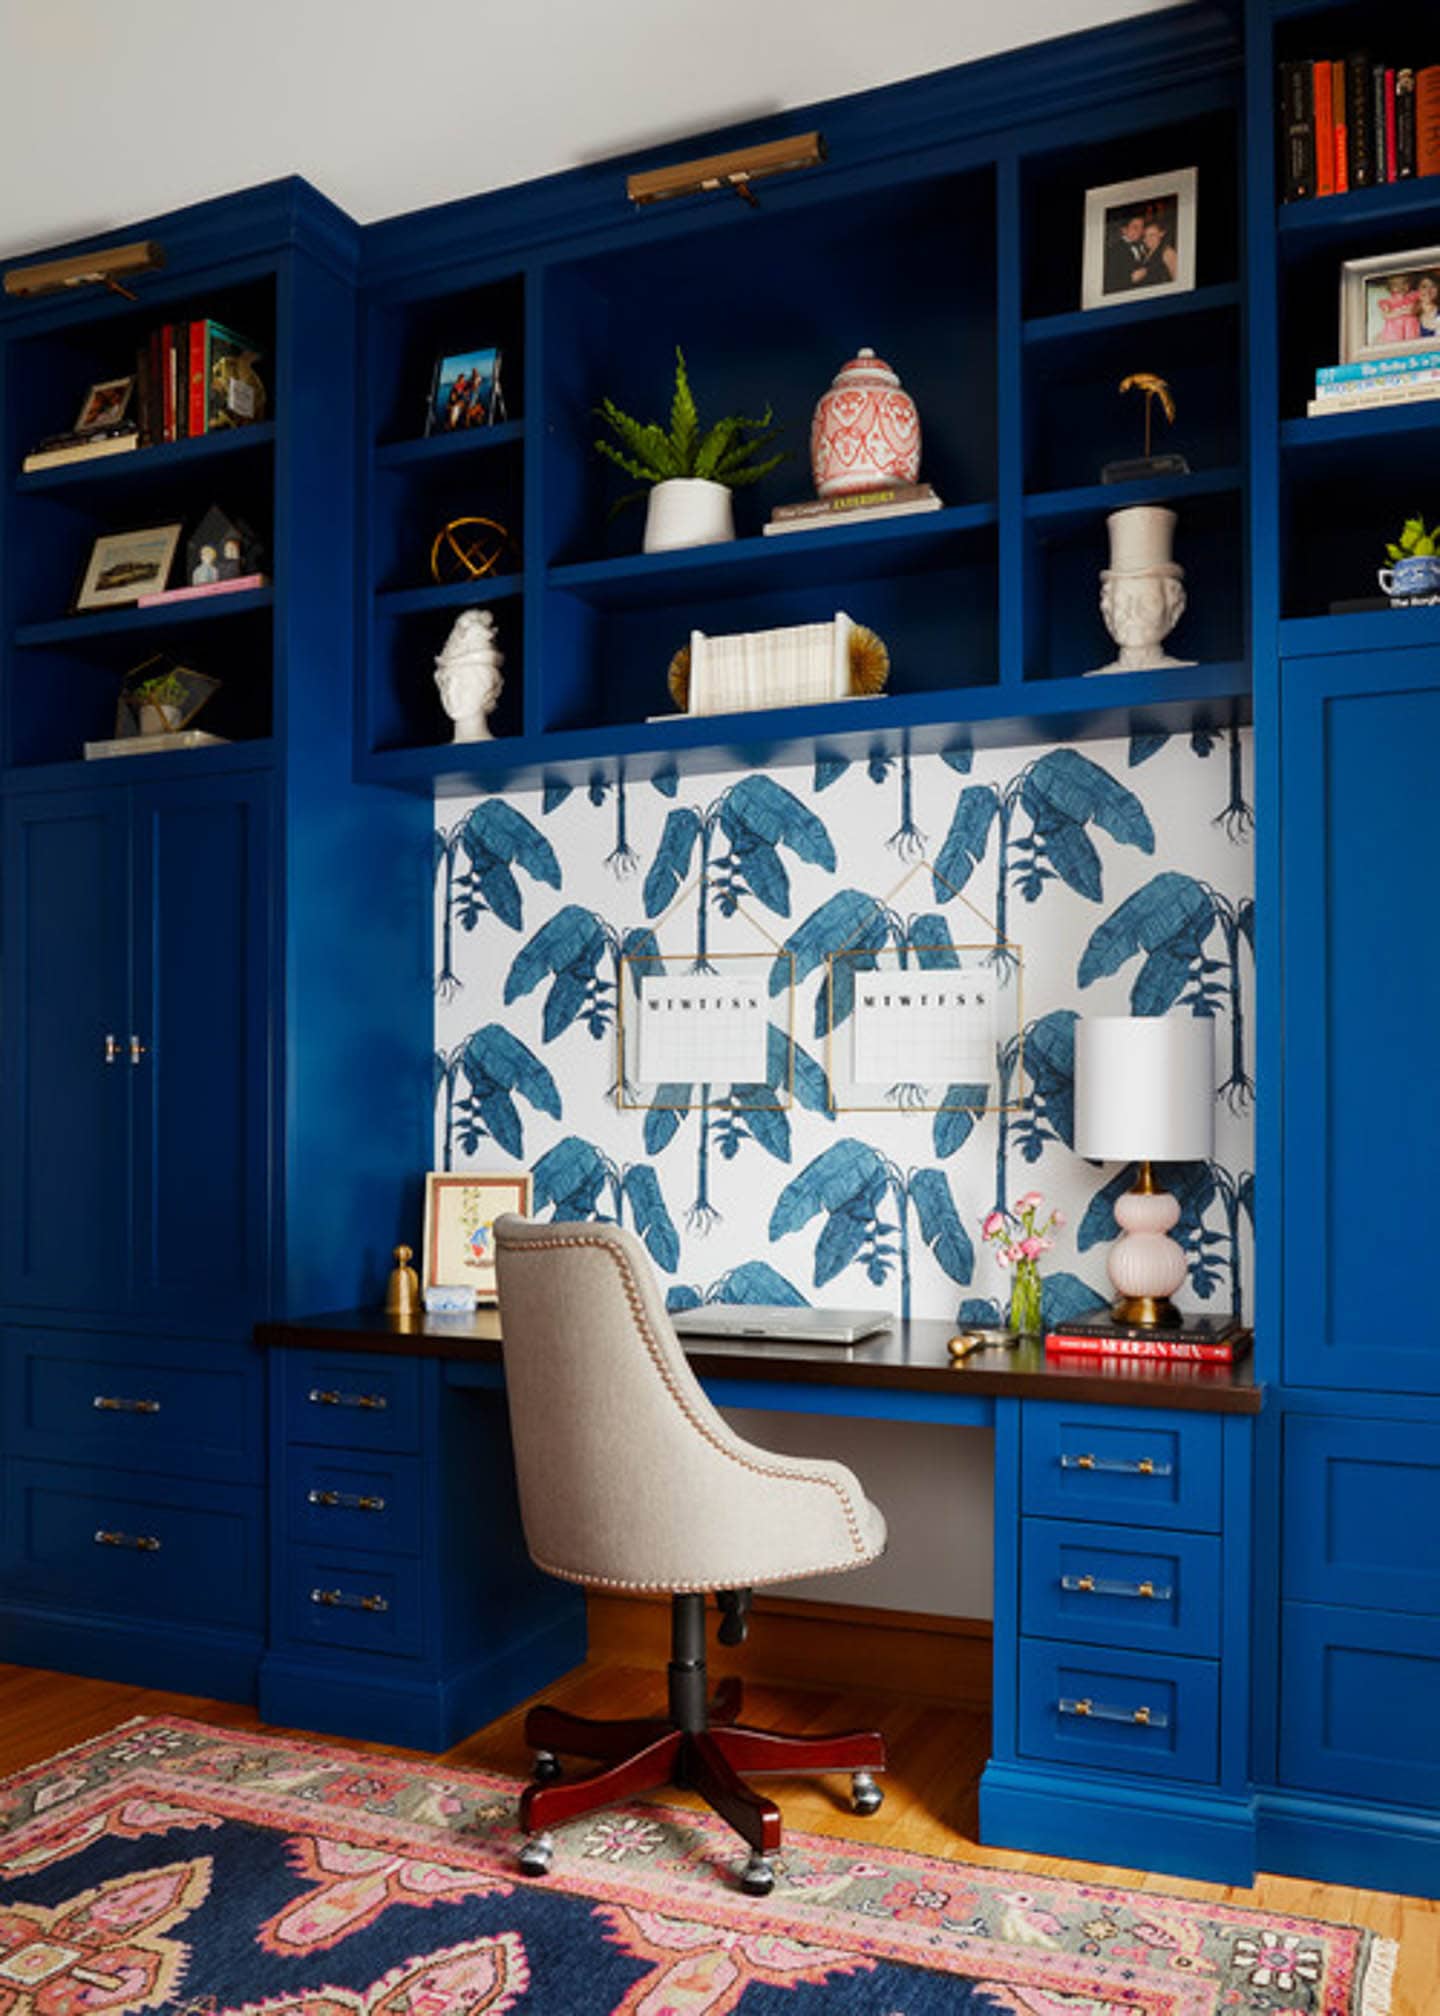 Dark blue shelves with a built-in desk and a white and blue leaf wallpaper above it